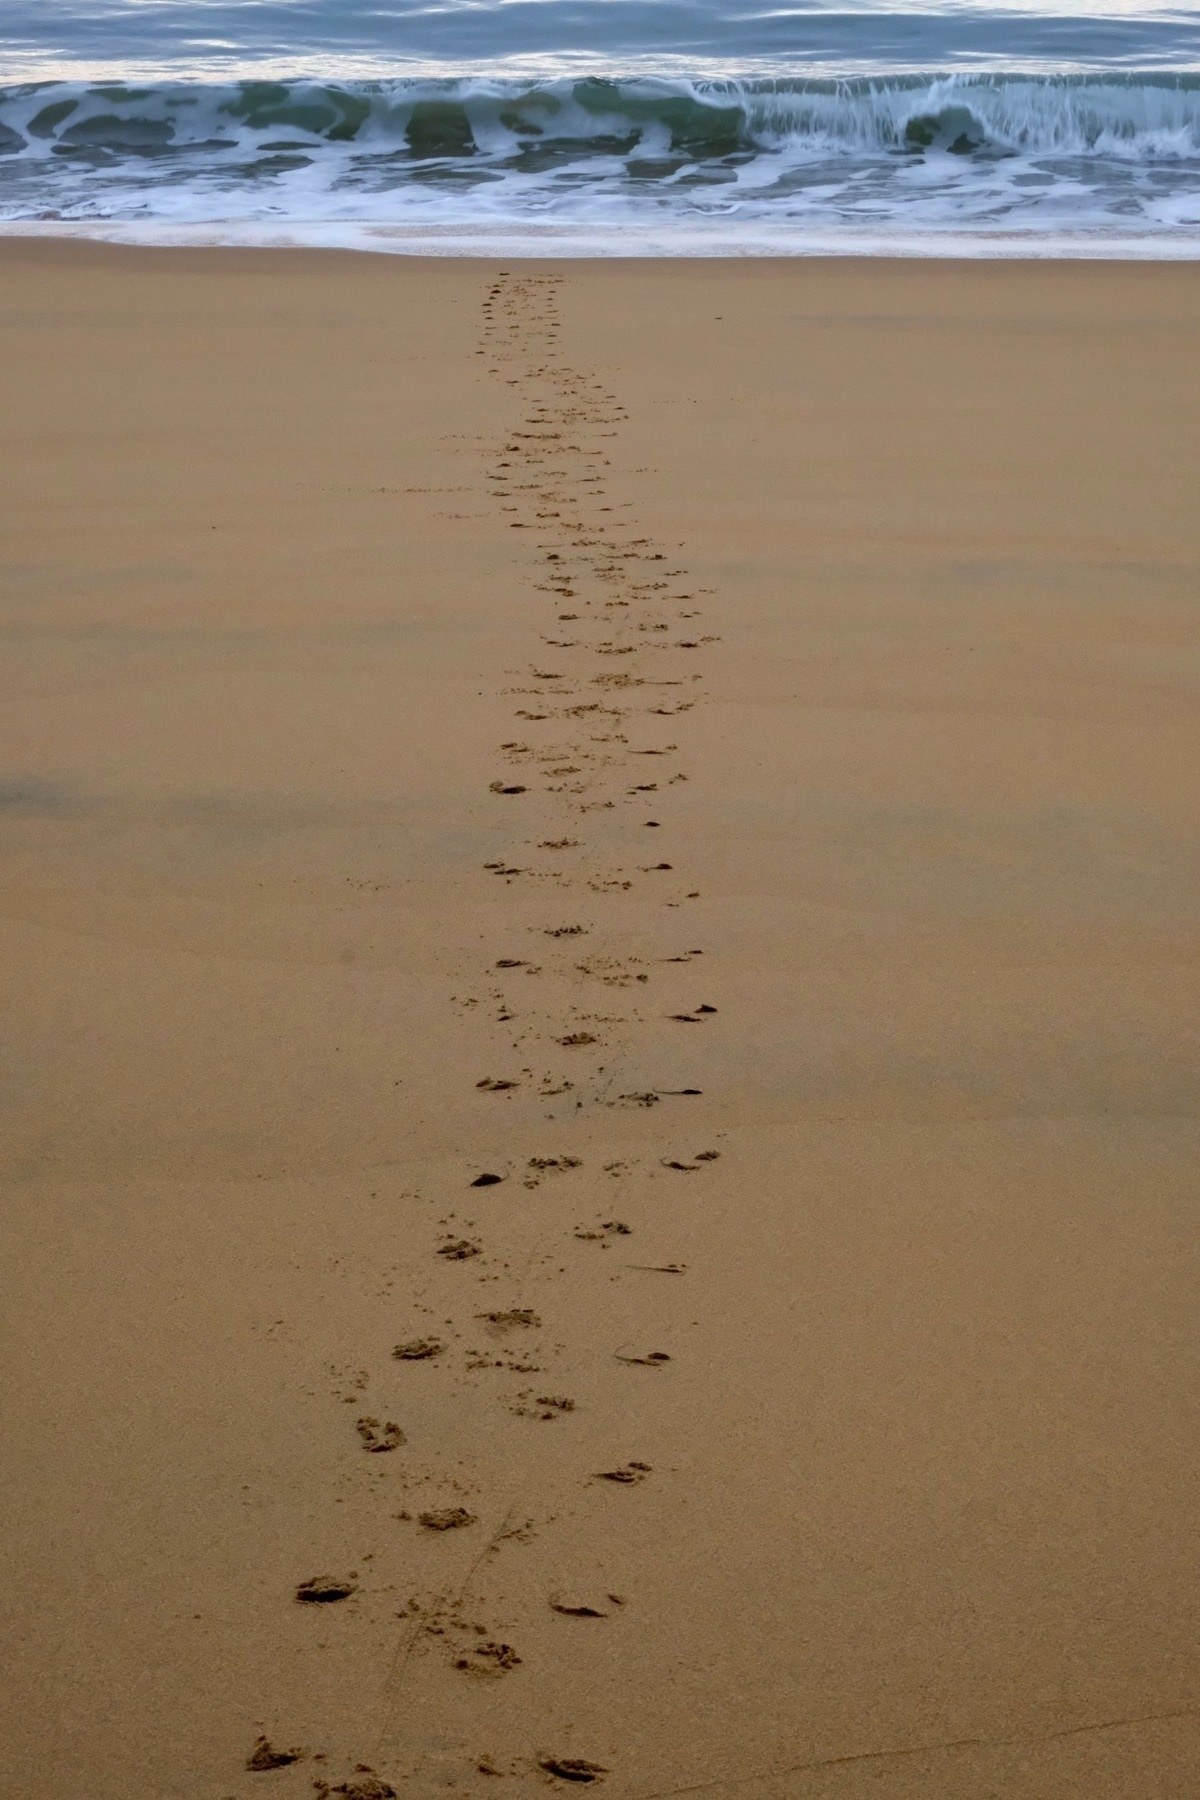 Penguin tracks across the sand from the sea. 